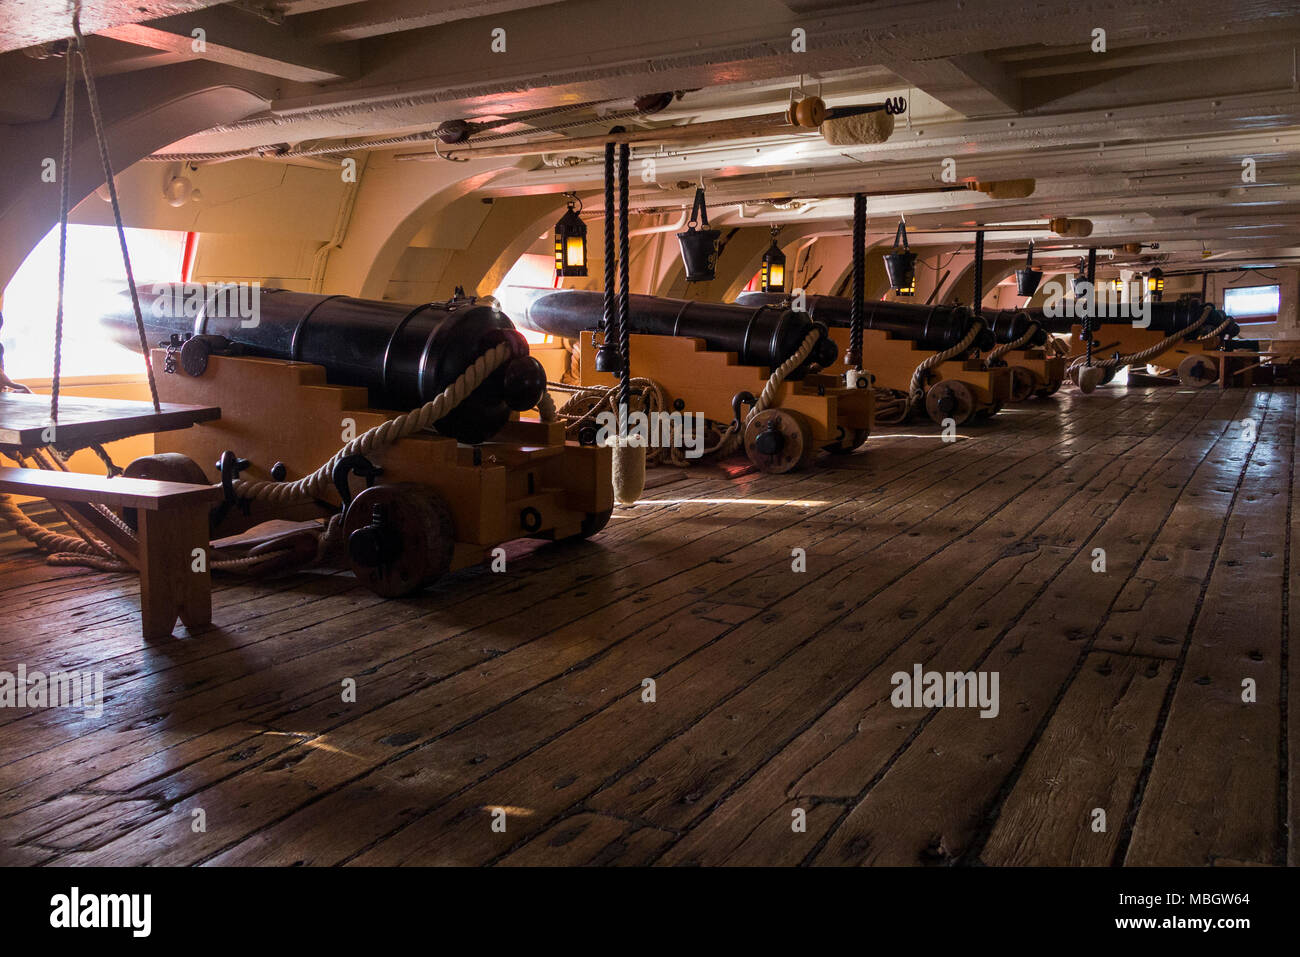 Gun deck & gun ports, with muzzle loading cannons, of Admiral Lord Nelson 's flagship HMS Victory. Portsmouth Historic Dockyard / Dockyards UK (95) Stock Photo